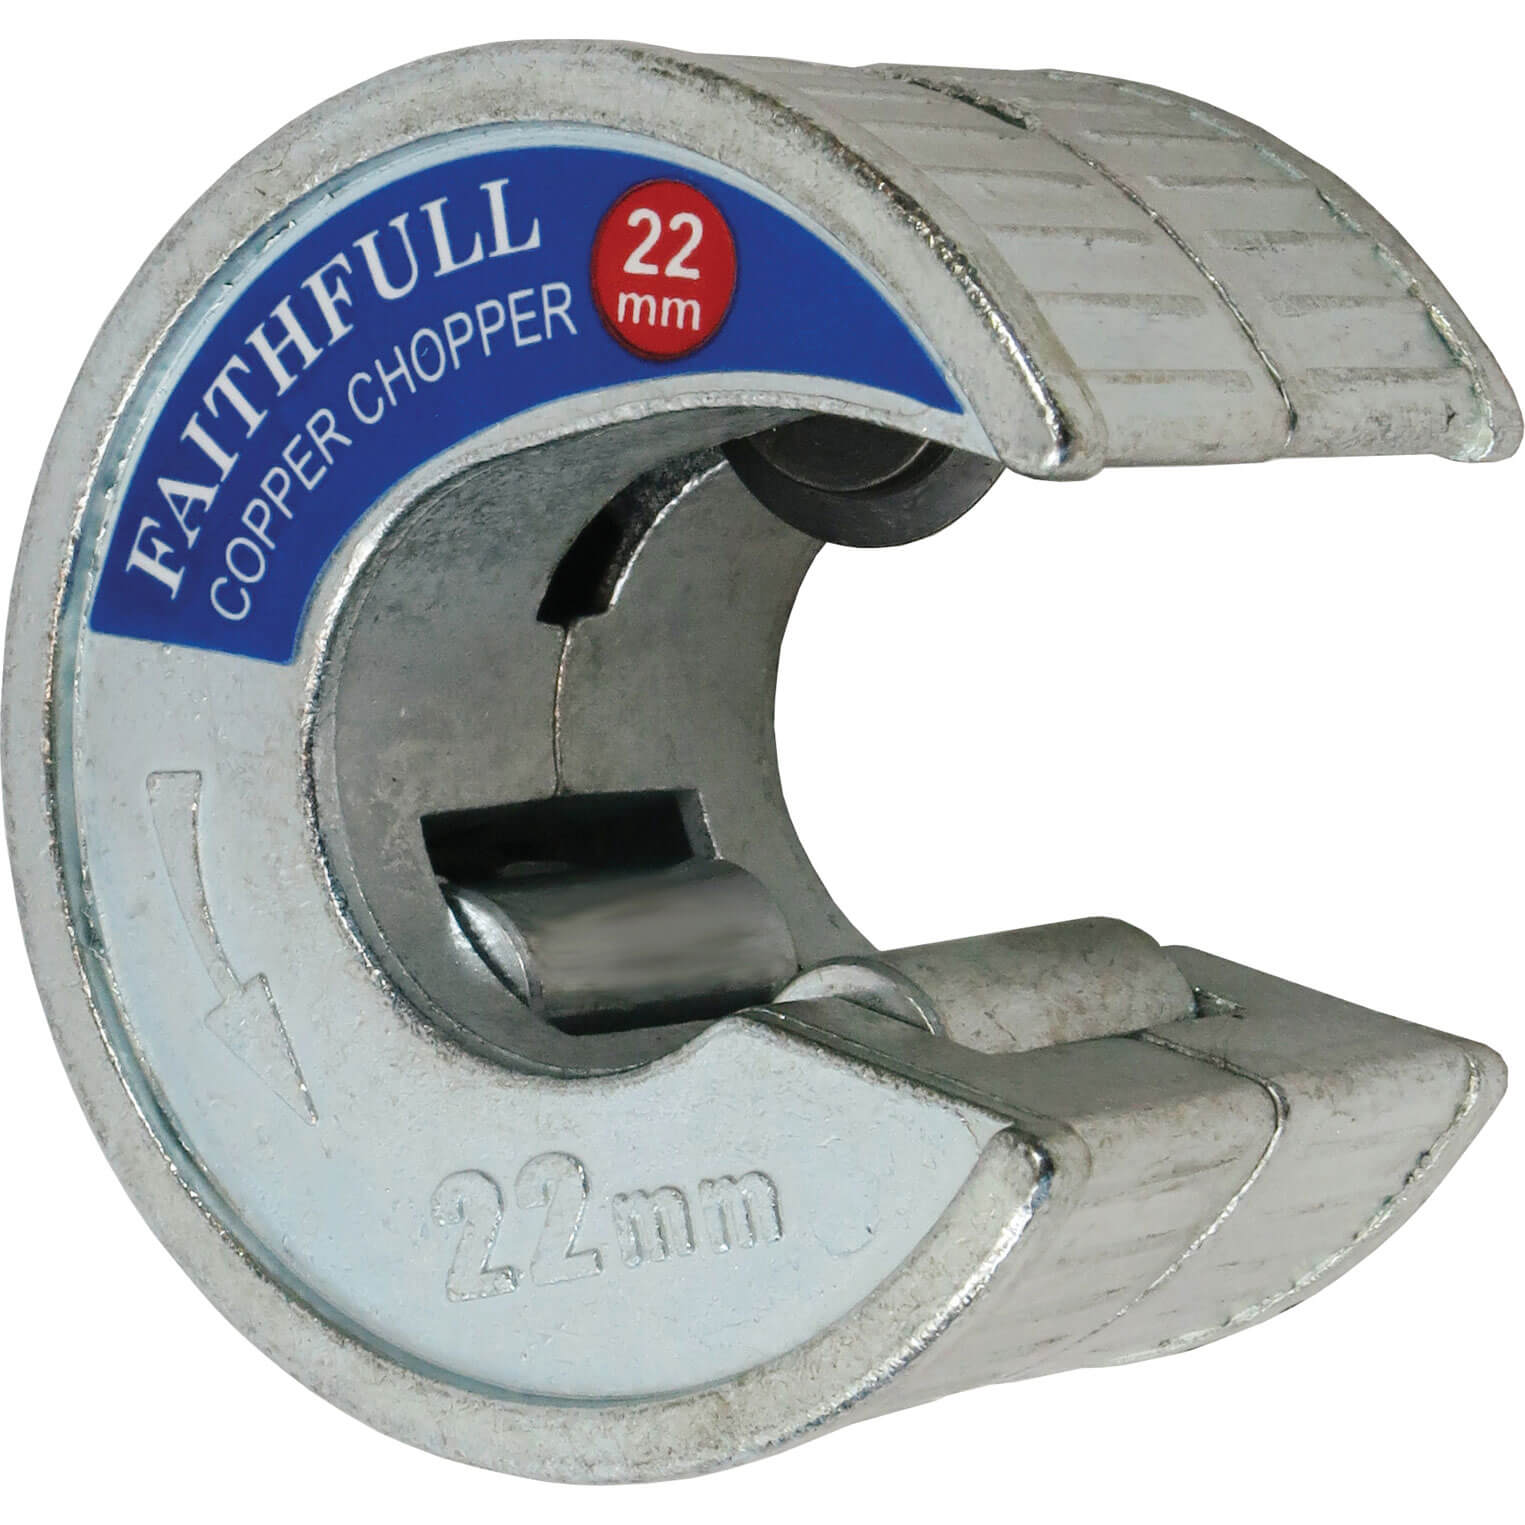 Photo of Faithfull Copper Pipe Cutter 22mm